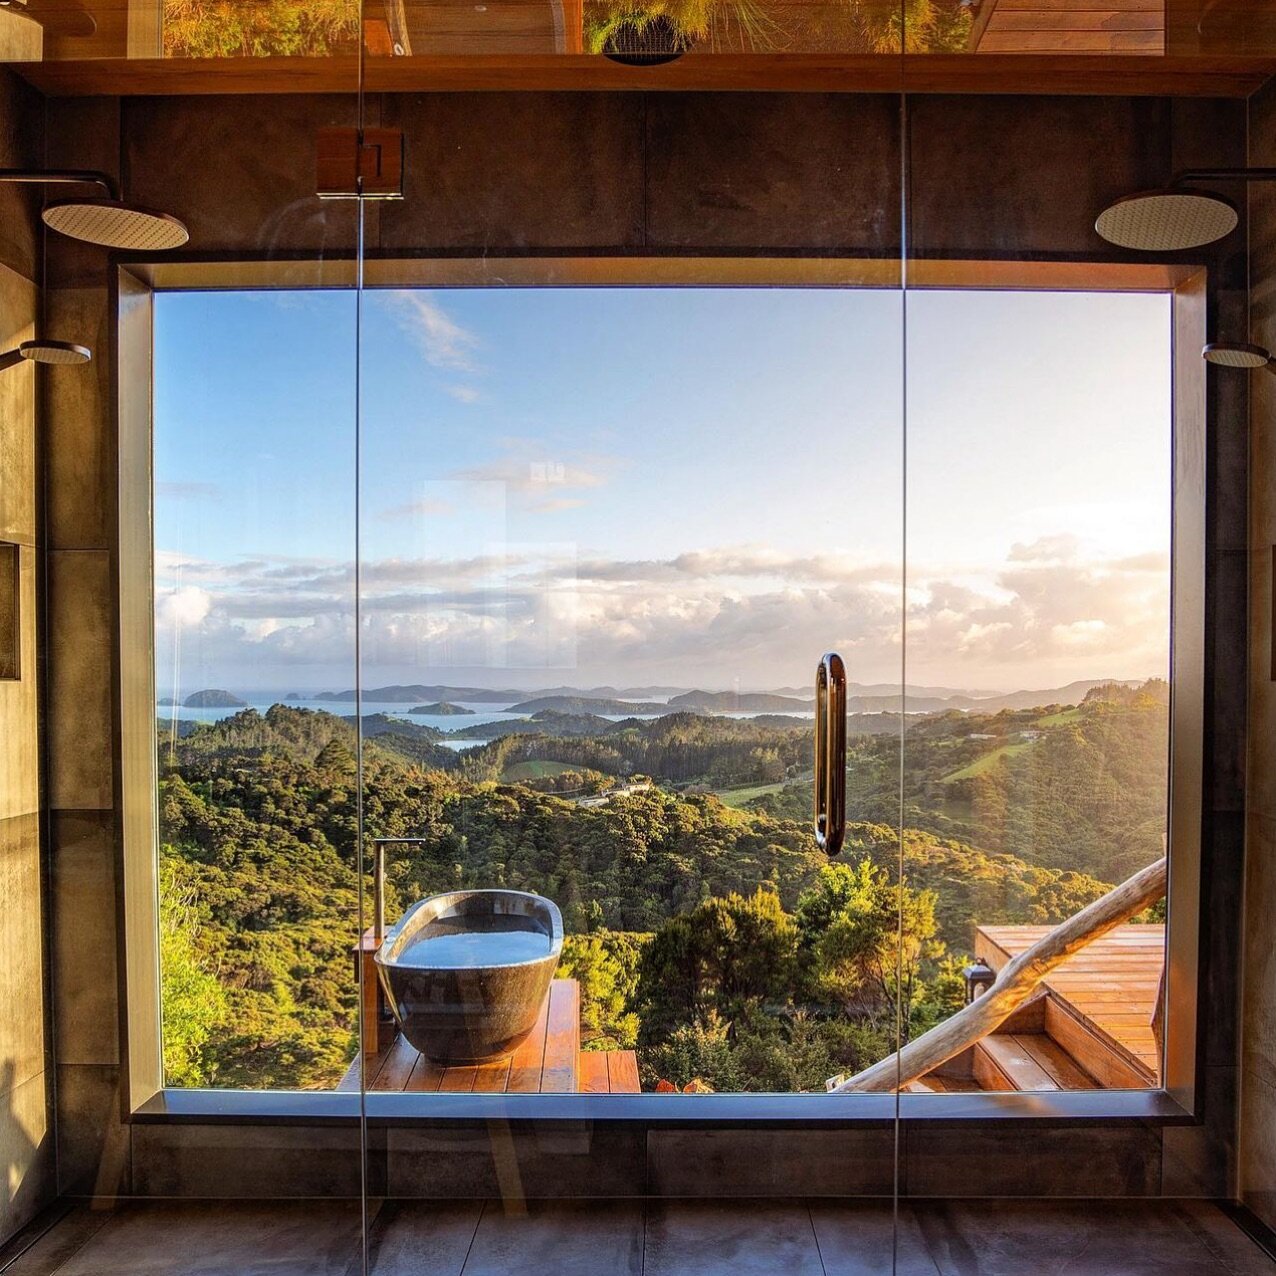 Stay Awhile @elevate_bay_of_islands 🌱 

Imagine a canvas painted with valleys, vineyards, forests, islands, bays, and the vast ocean - all in one breathtaking panoramic view.

🏡 Step inside the cabin, where luxury meets nature. Tasmanian hardwood f